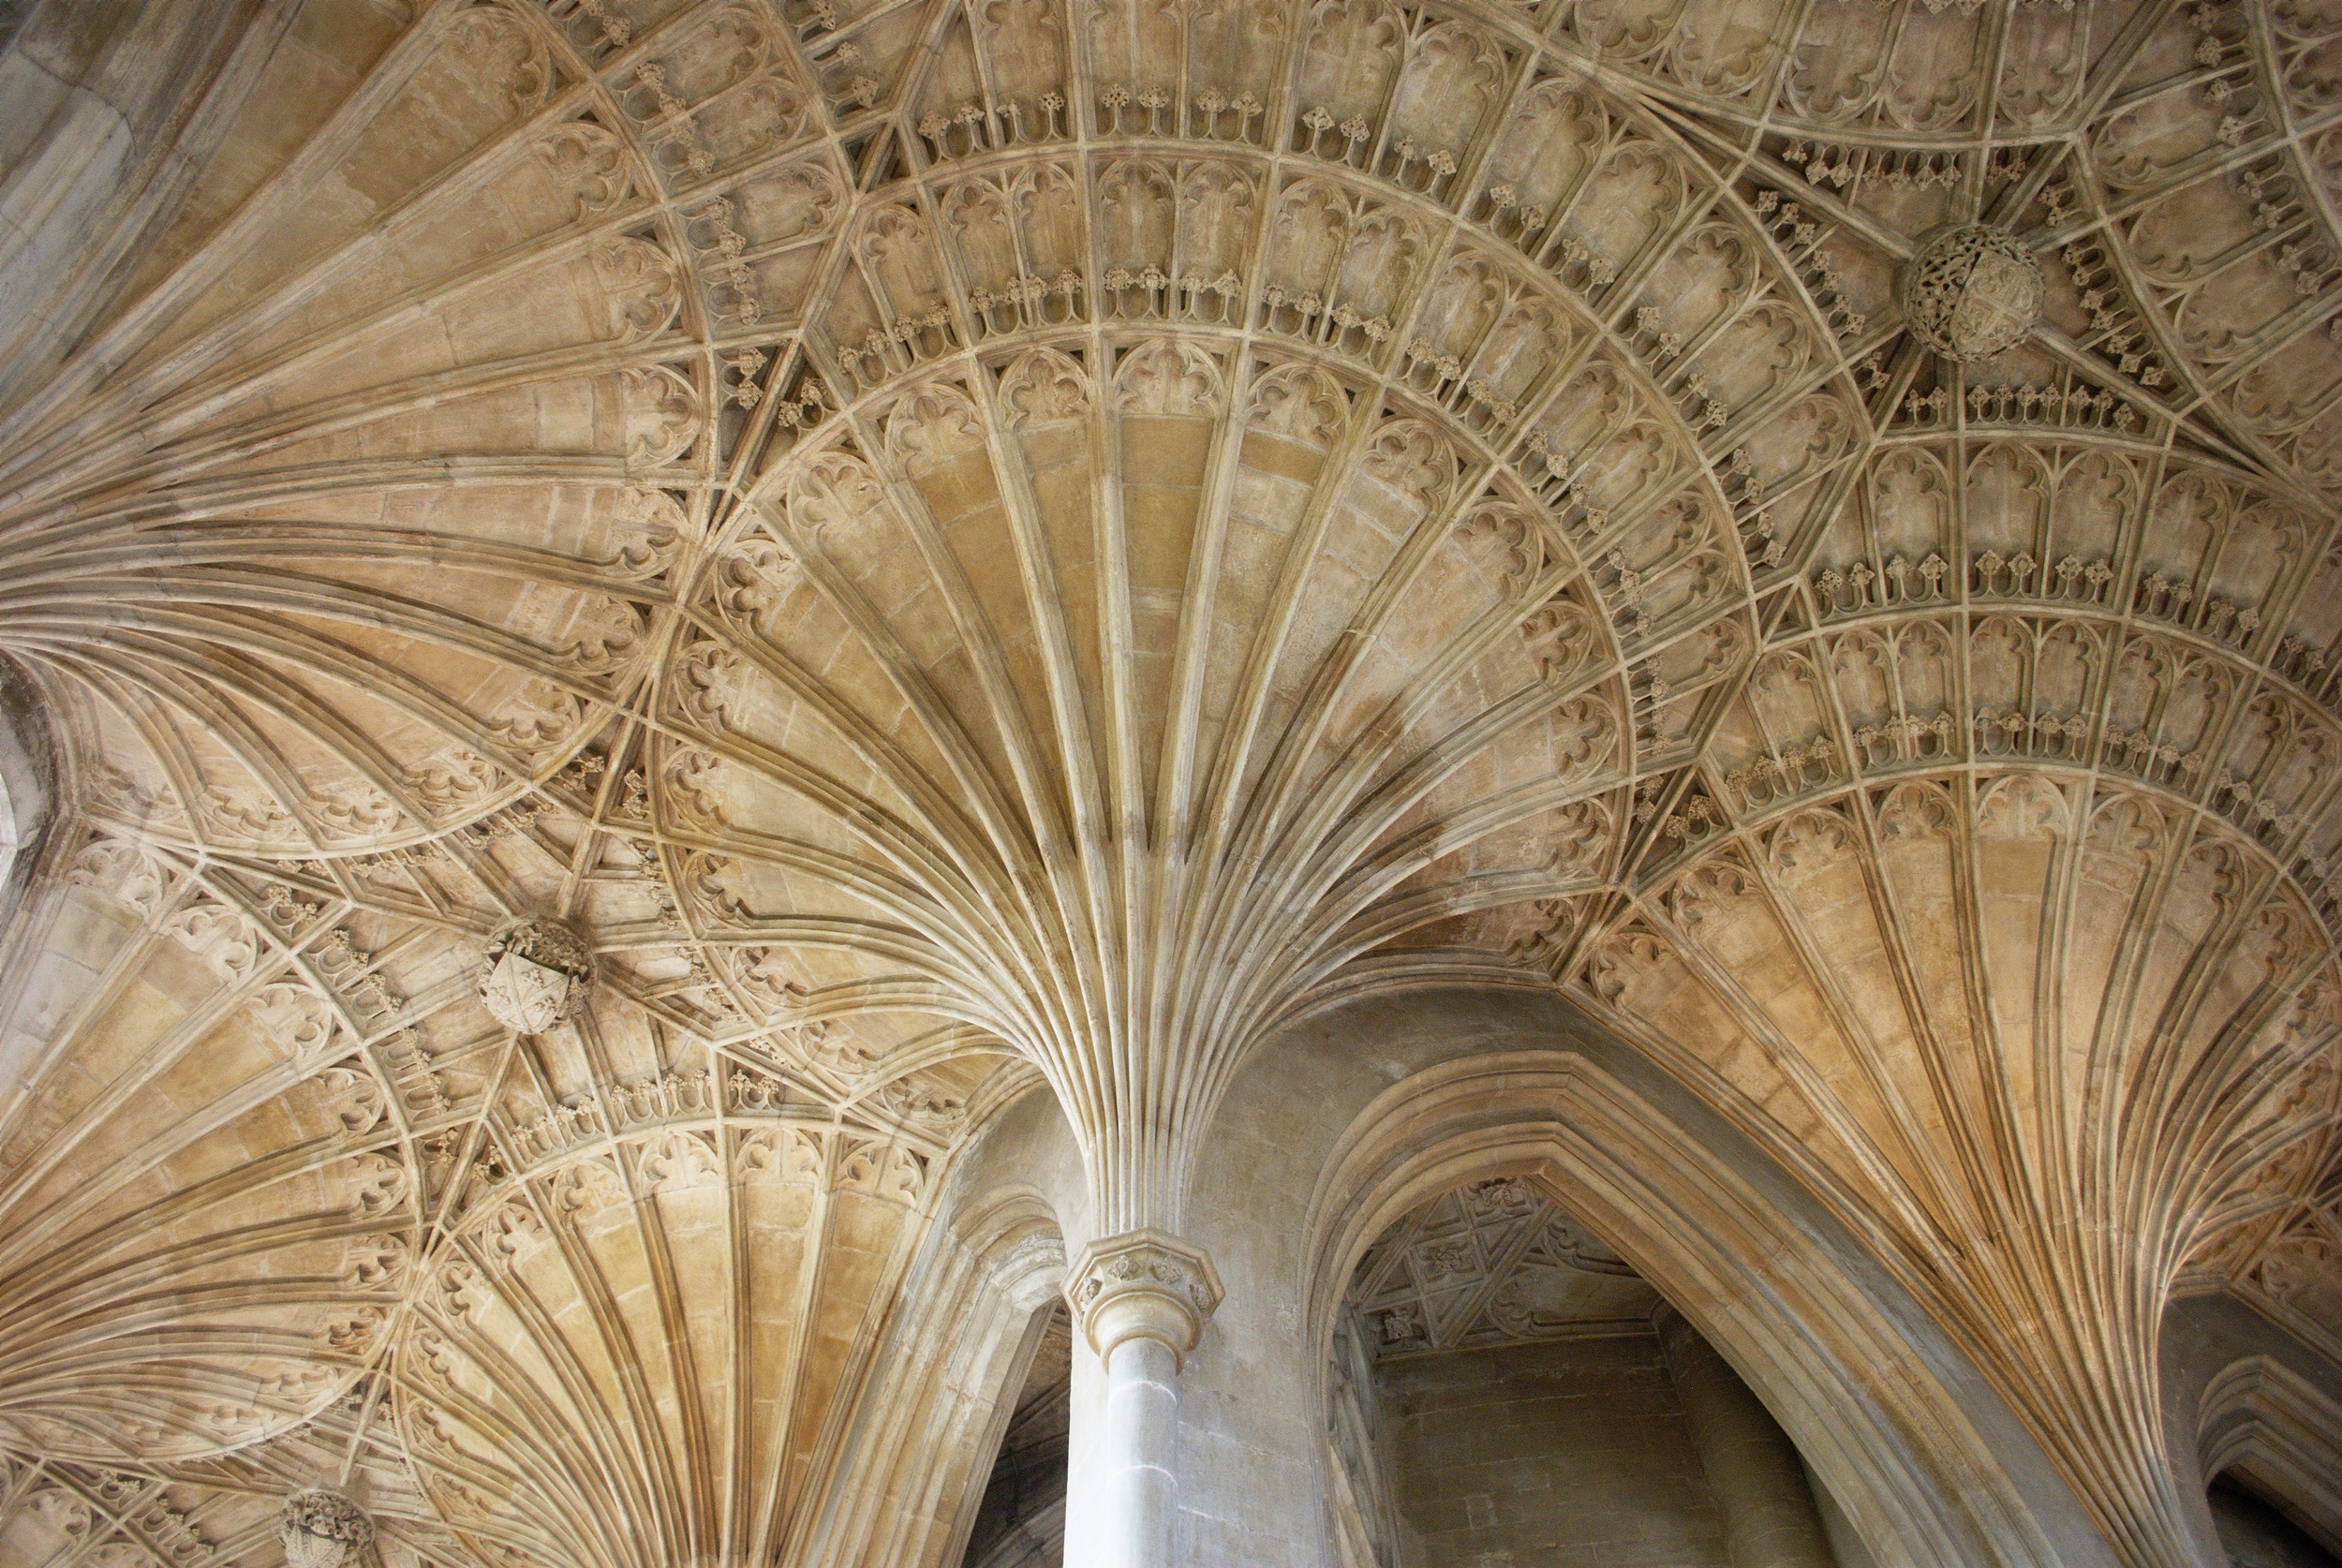 File:Peterborough Cathedral fan vaulting.jpg - Wikimedia Commons